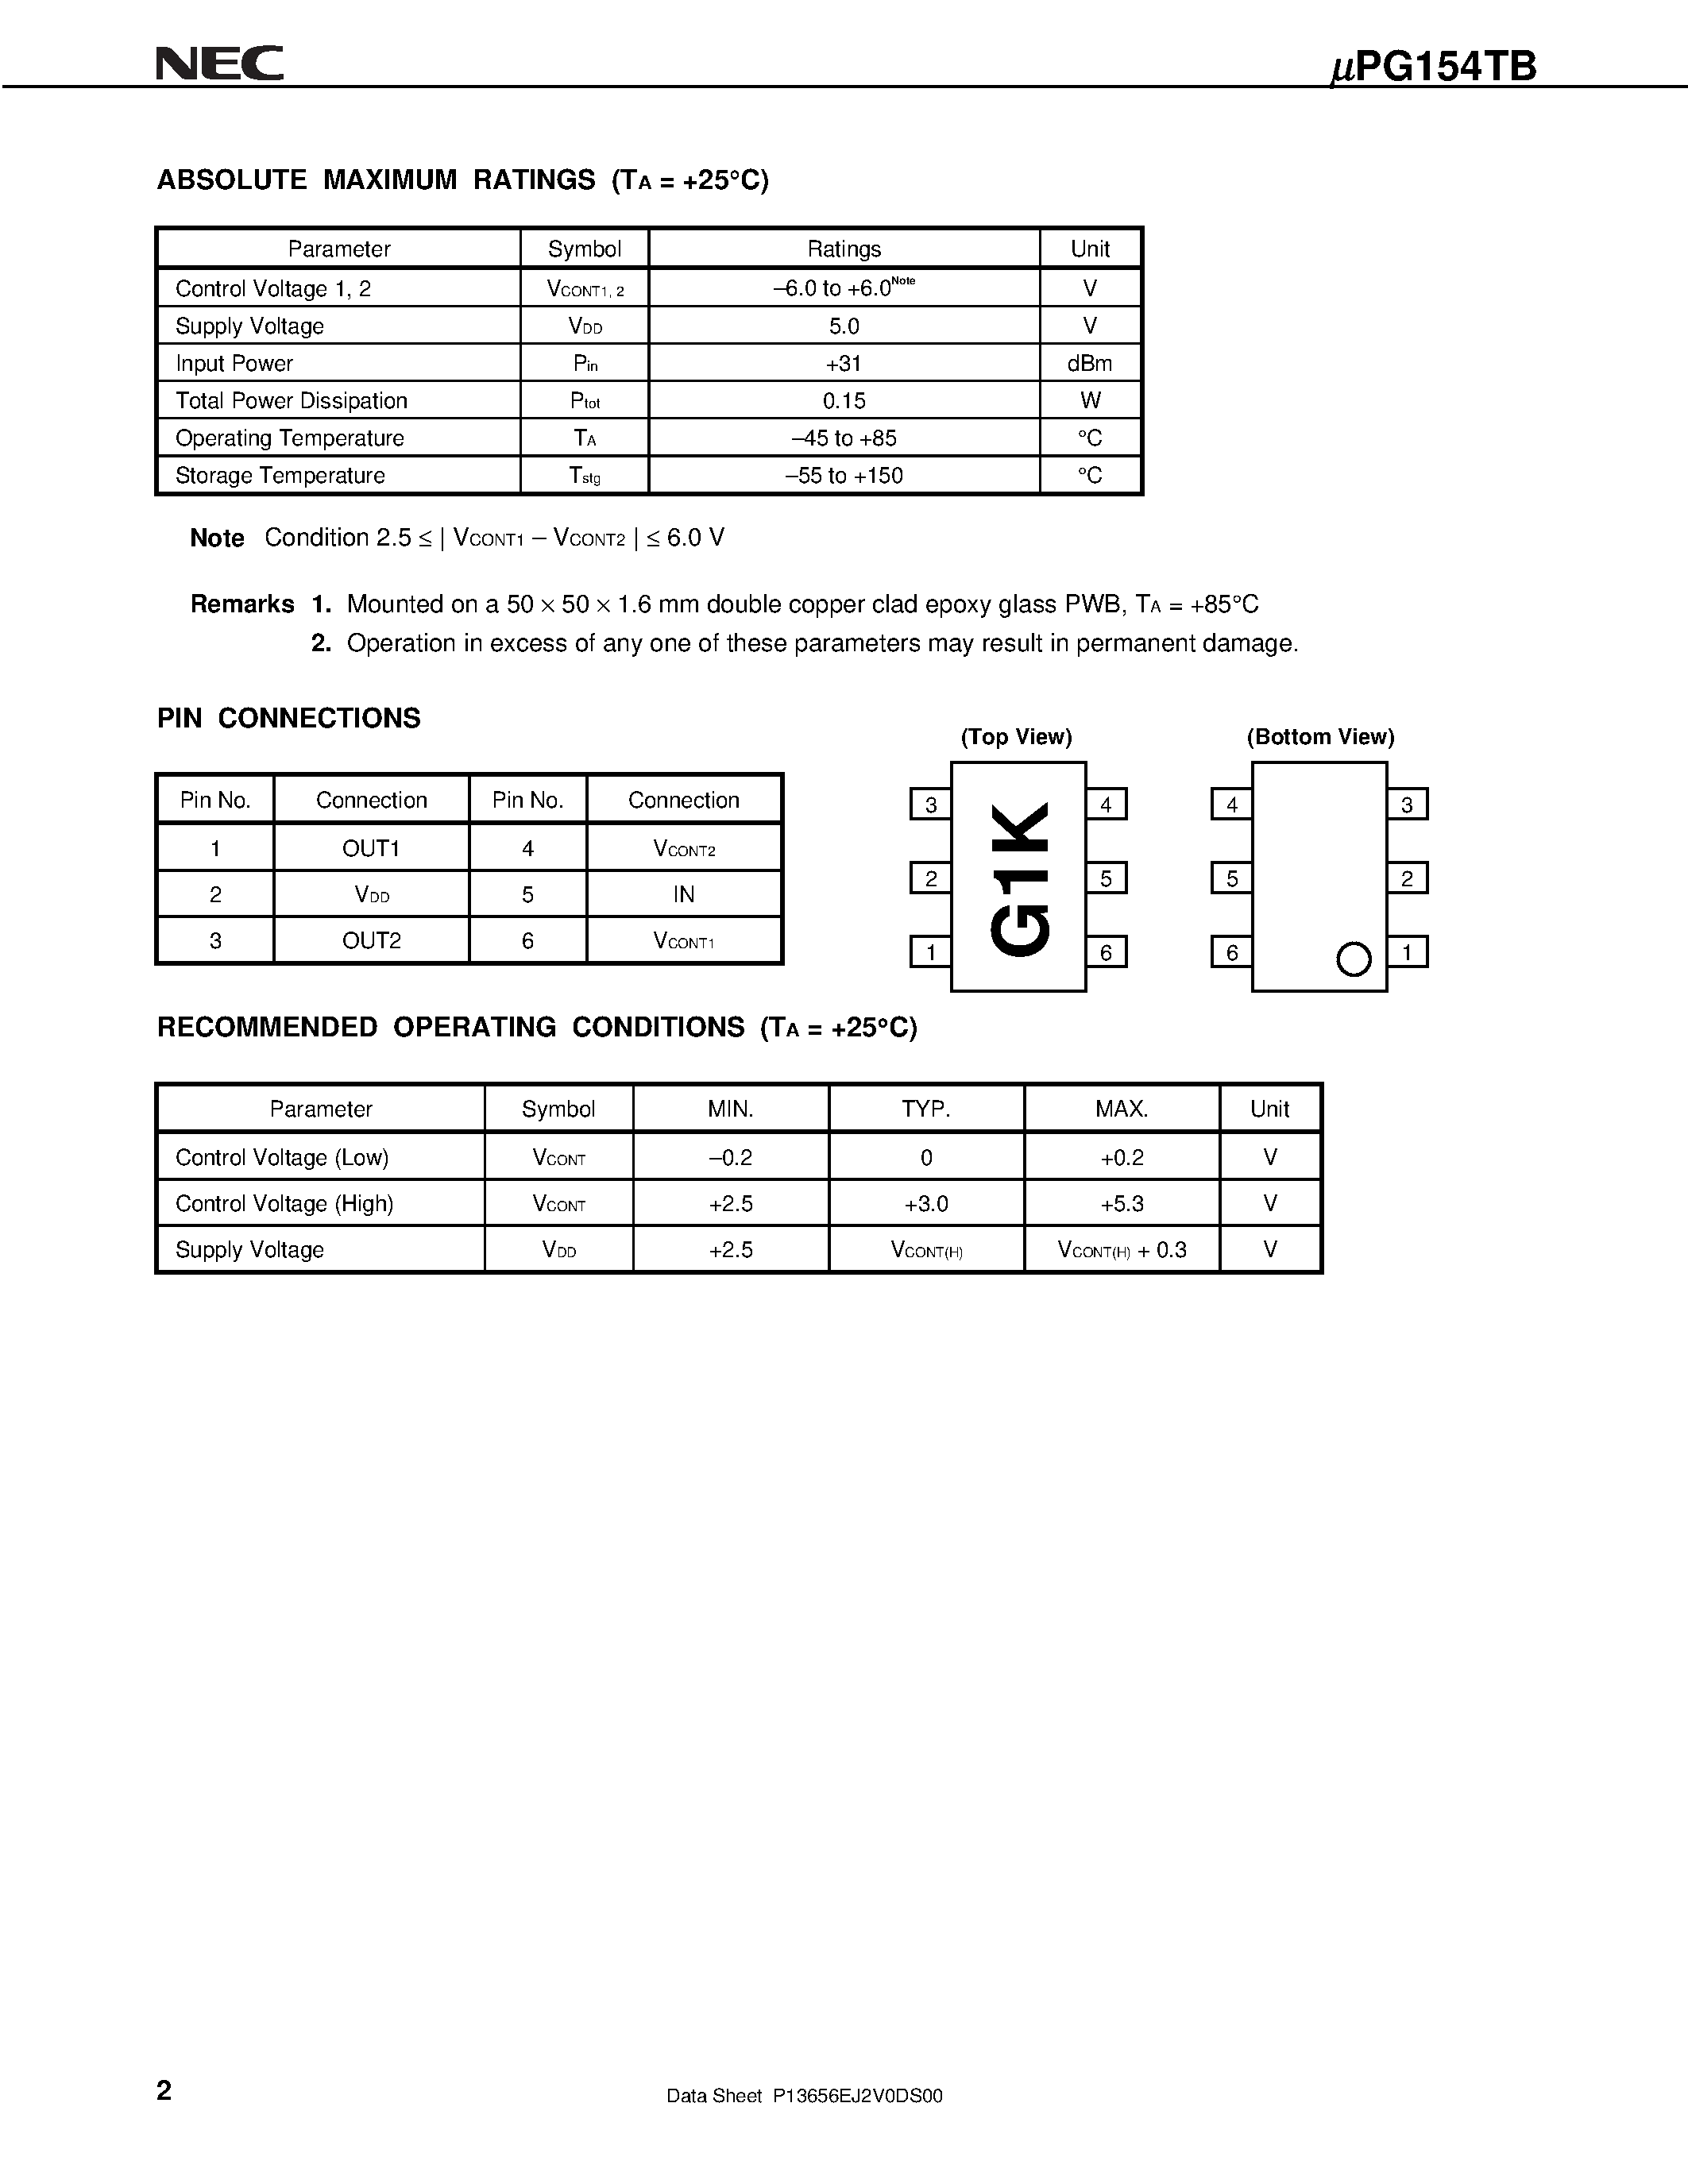 Datasheet UPG154TB-E3 - L-BAND SPDT SWITCH page 2